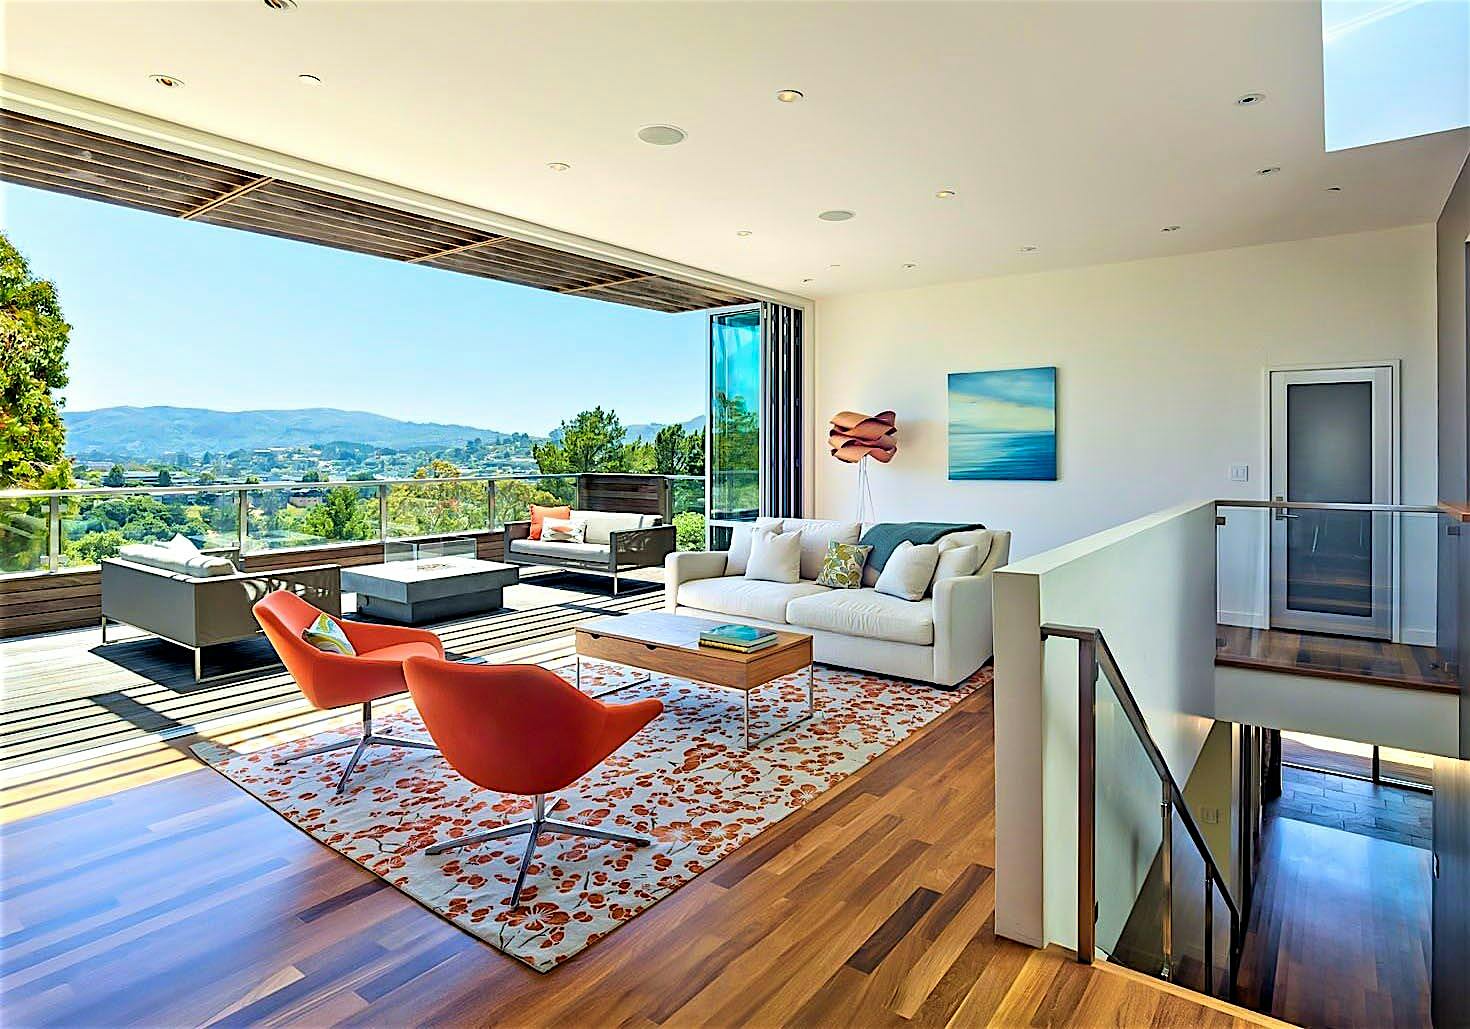 indoor/outdoor living achieved in hillside home with folding glass wall in living room remodel